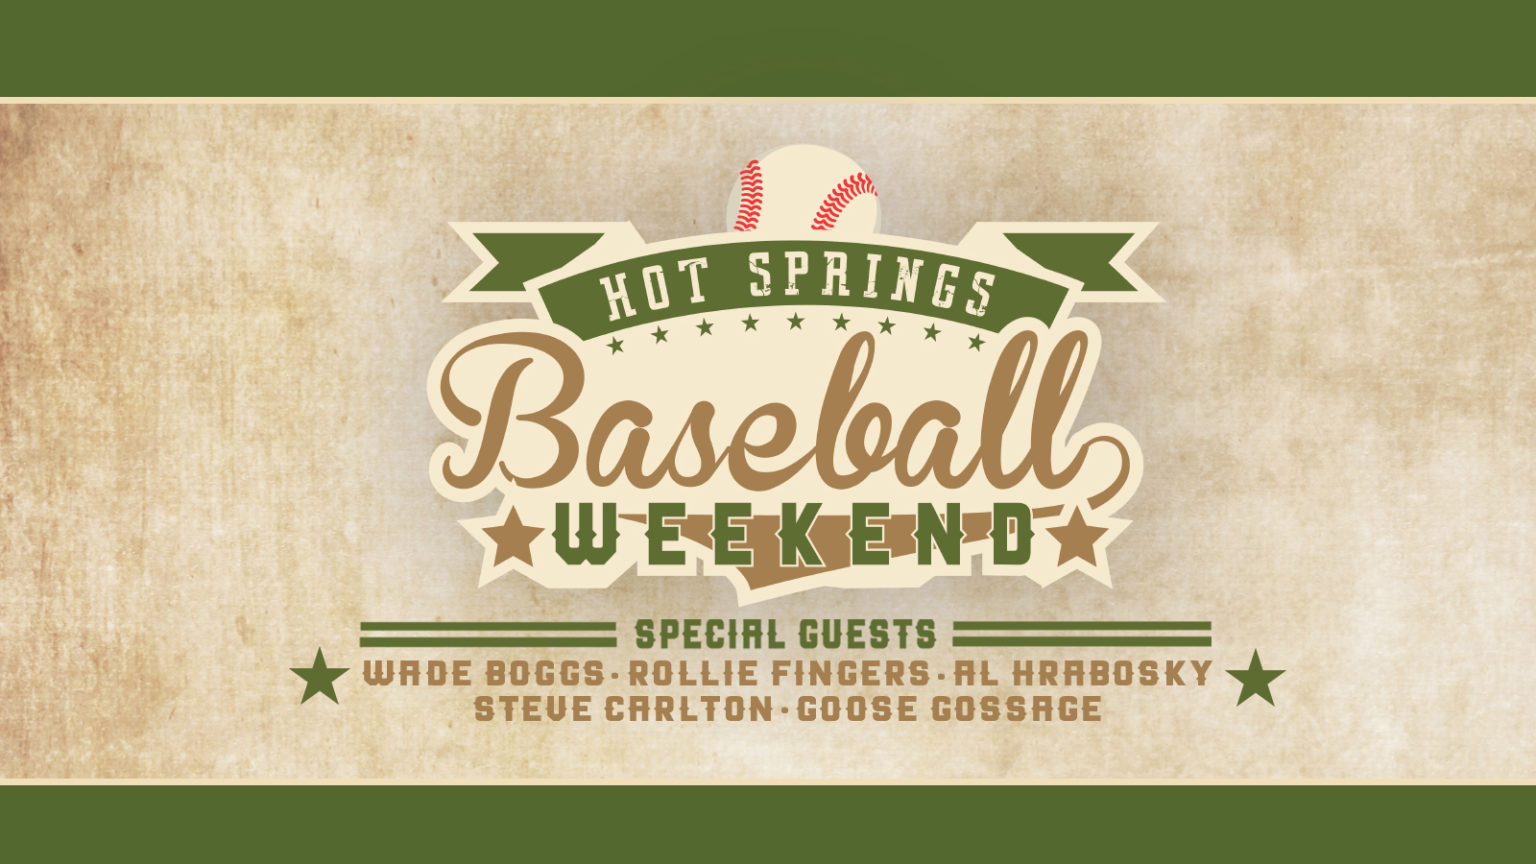 6th Annual Hot Springs Baseball Weekend Majestic Park